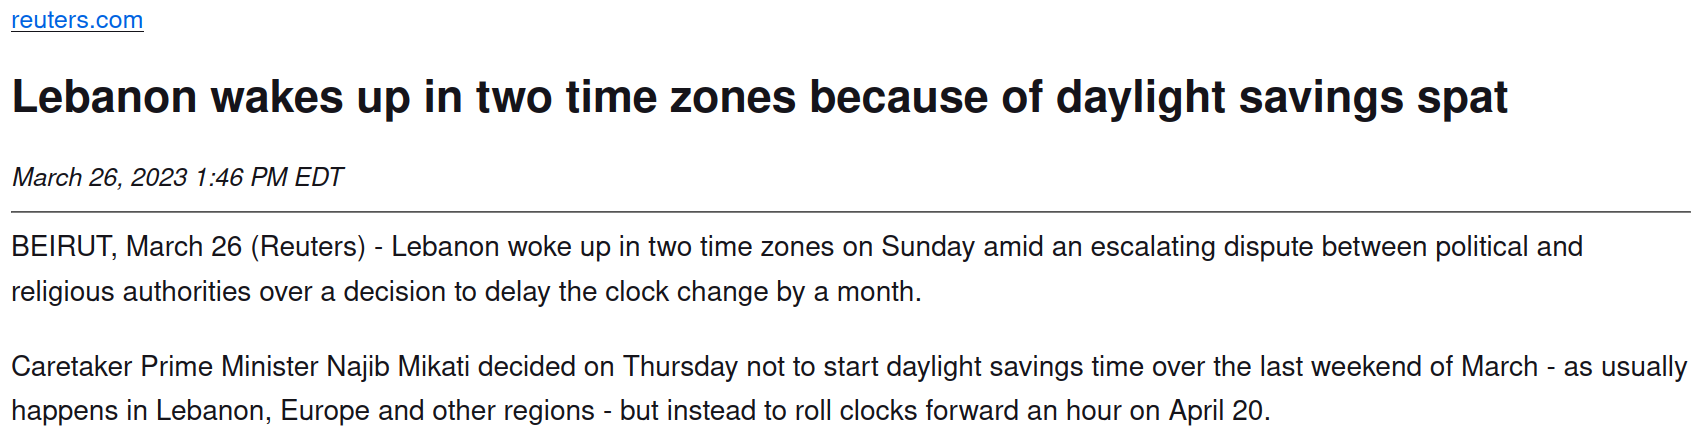 Lebanon wakes up in two time zones because of daylight savings spat — a news article from reuters about Lebanon changing their time zone at the last minute.